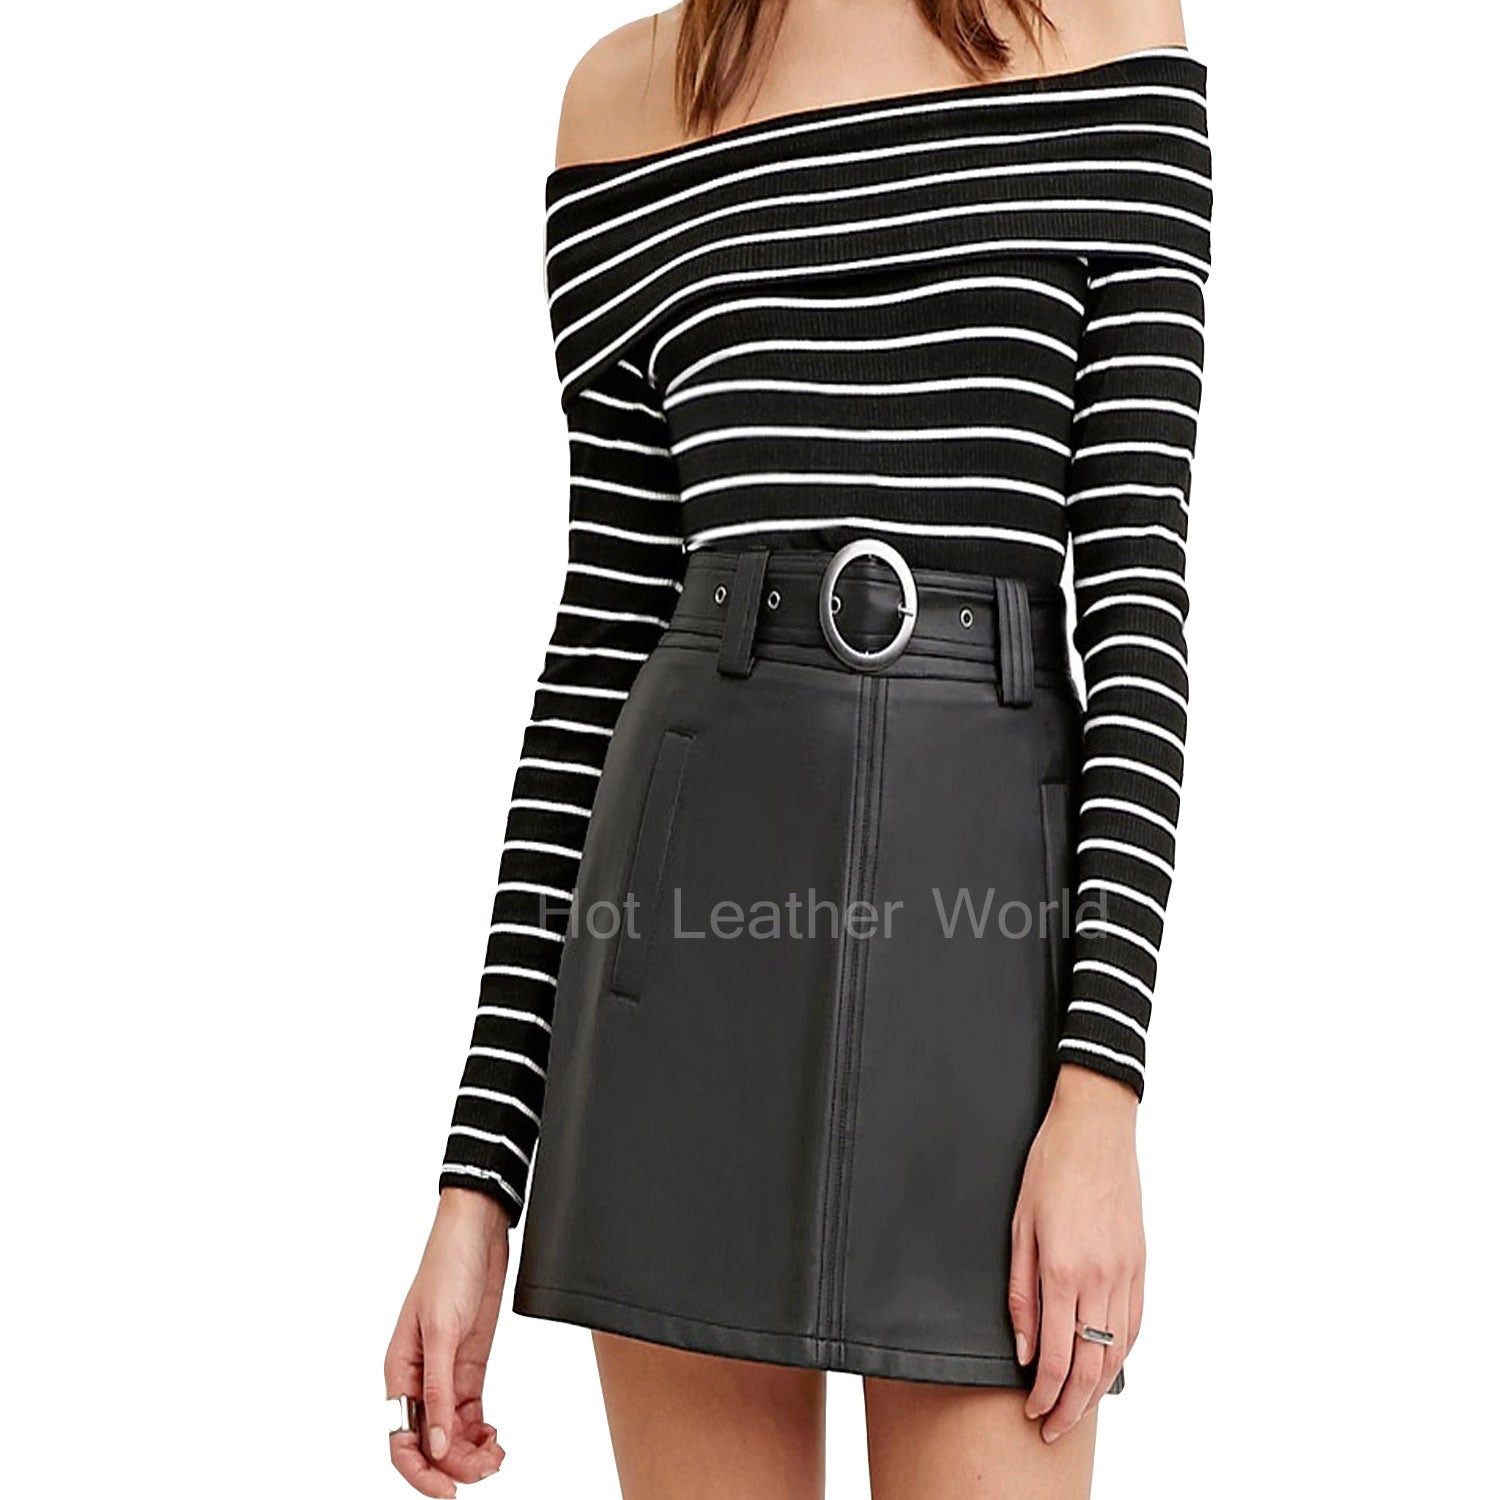 Belted Leather Skirt For Women -  HOTLEATHERWORLD